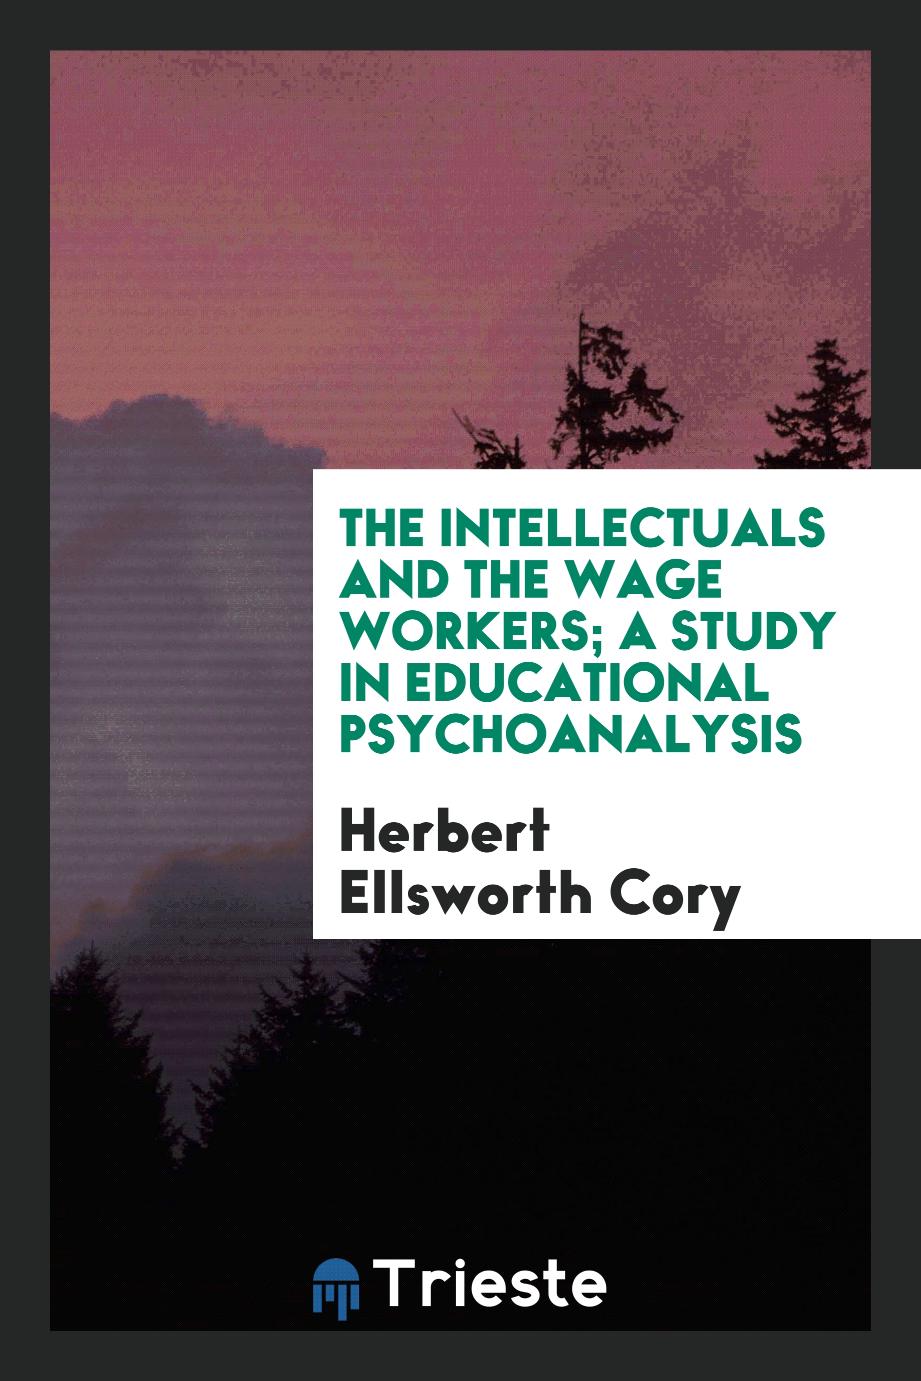 The intellectuals and the wage workers; a study in educational psychoanalysis